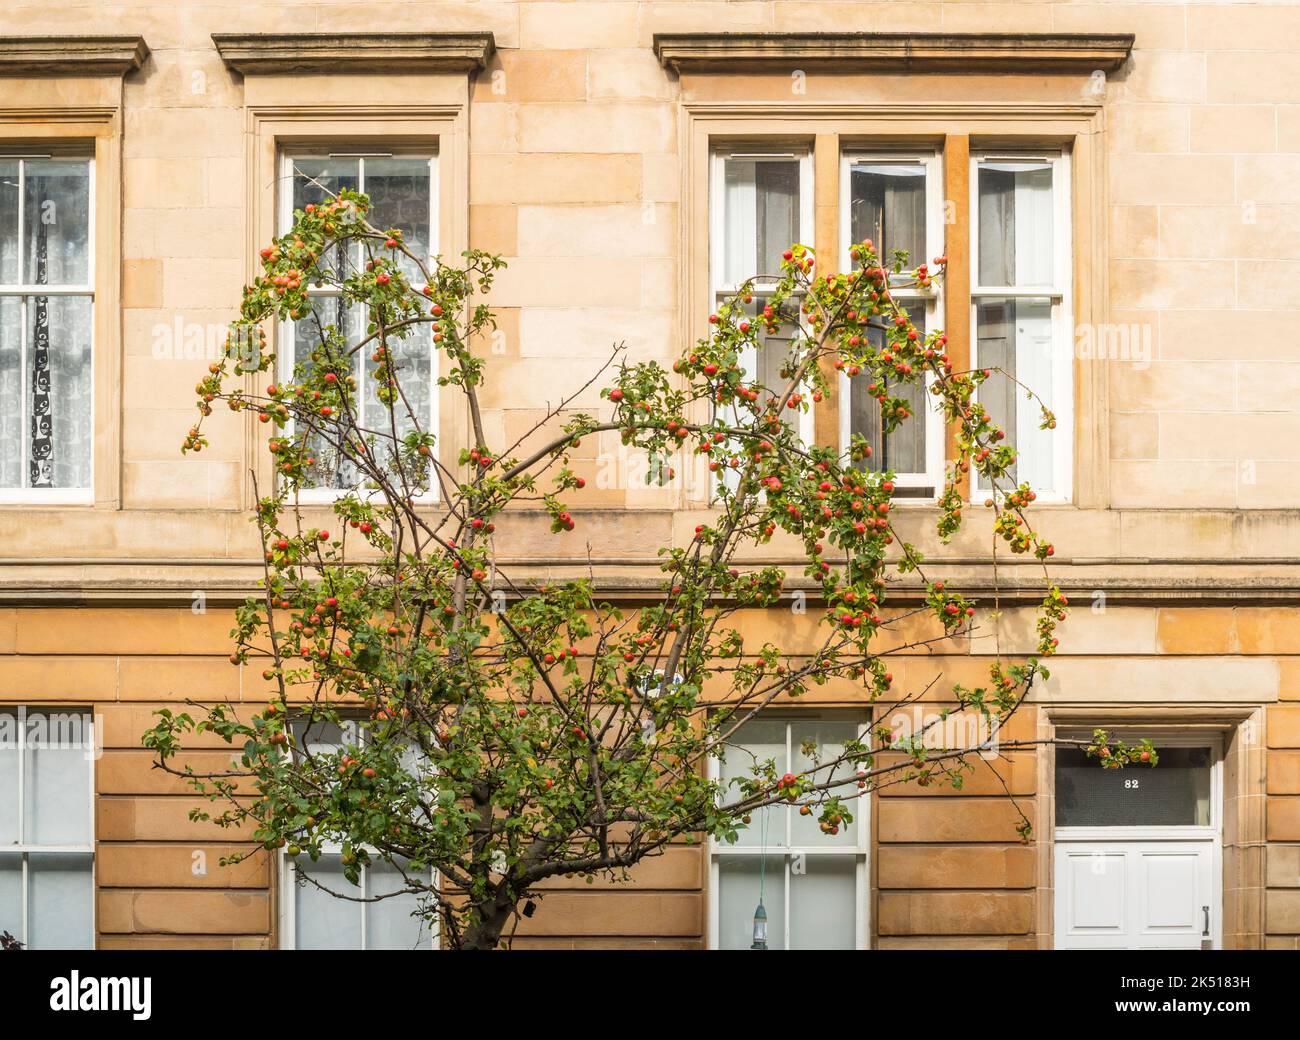 A fruiting apple tree outside an apartment building in Hill Street, Garnethill, Glasgow, Scotland, UK Stock Photo